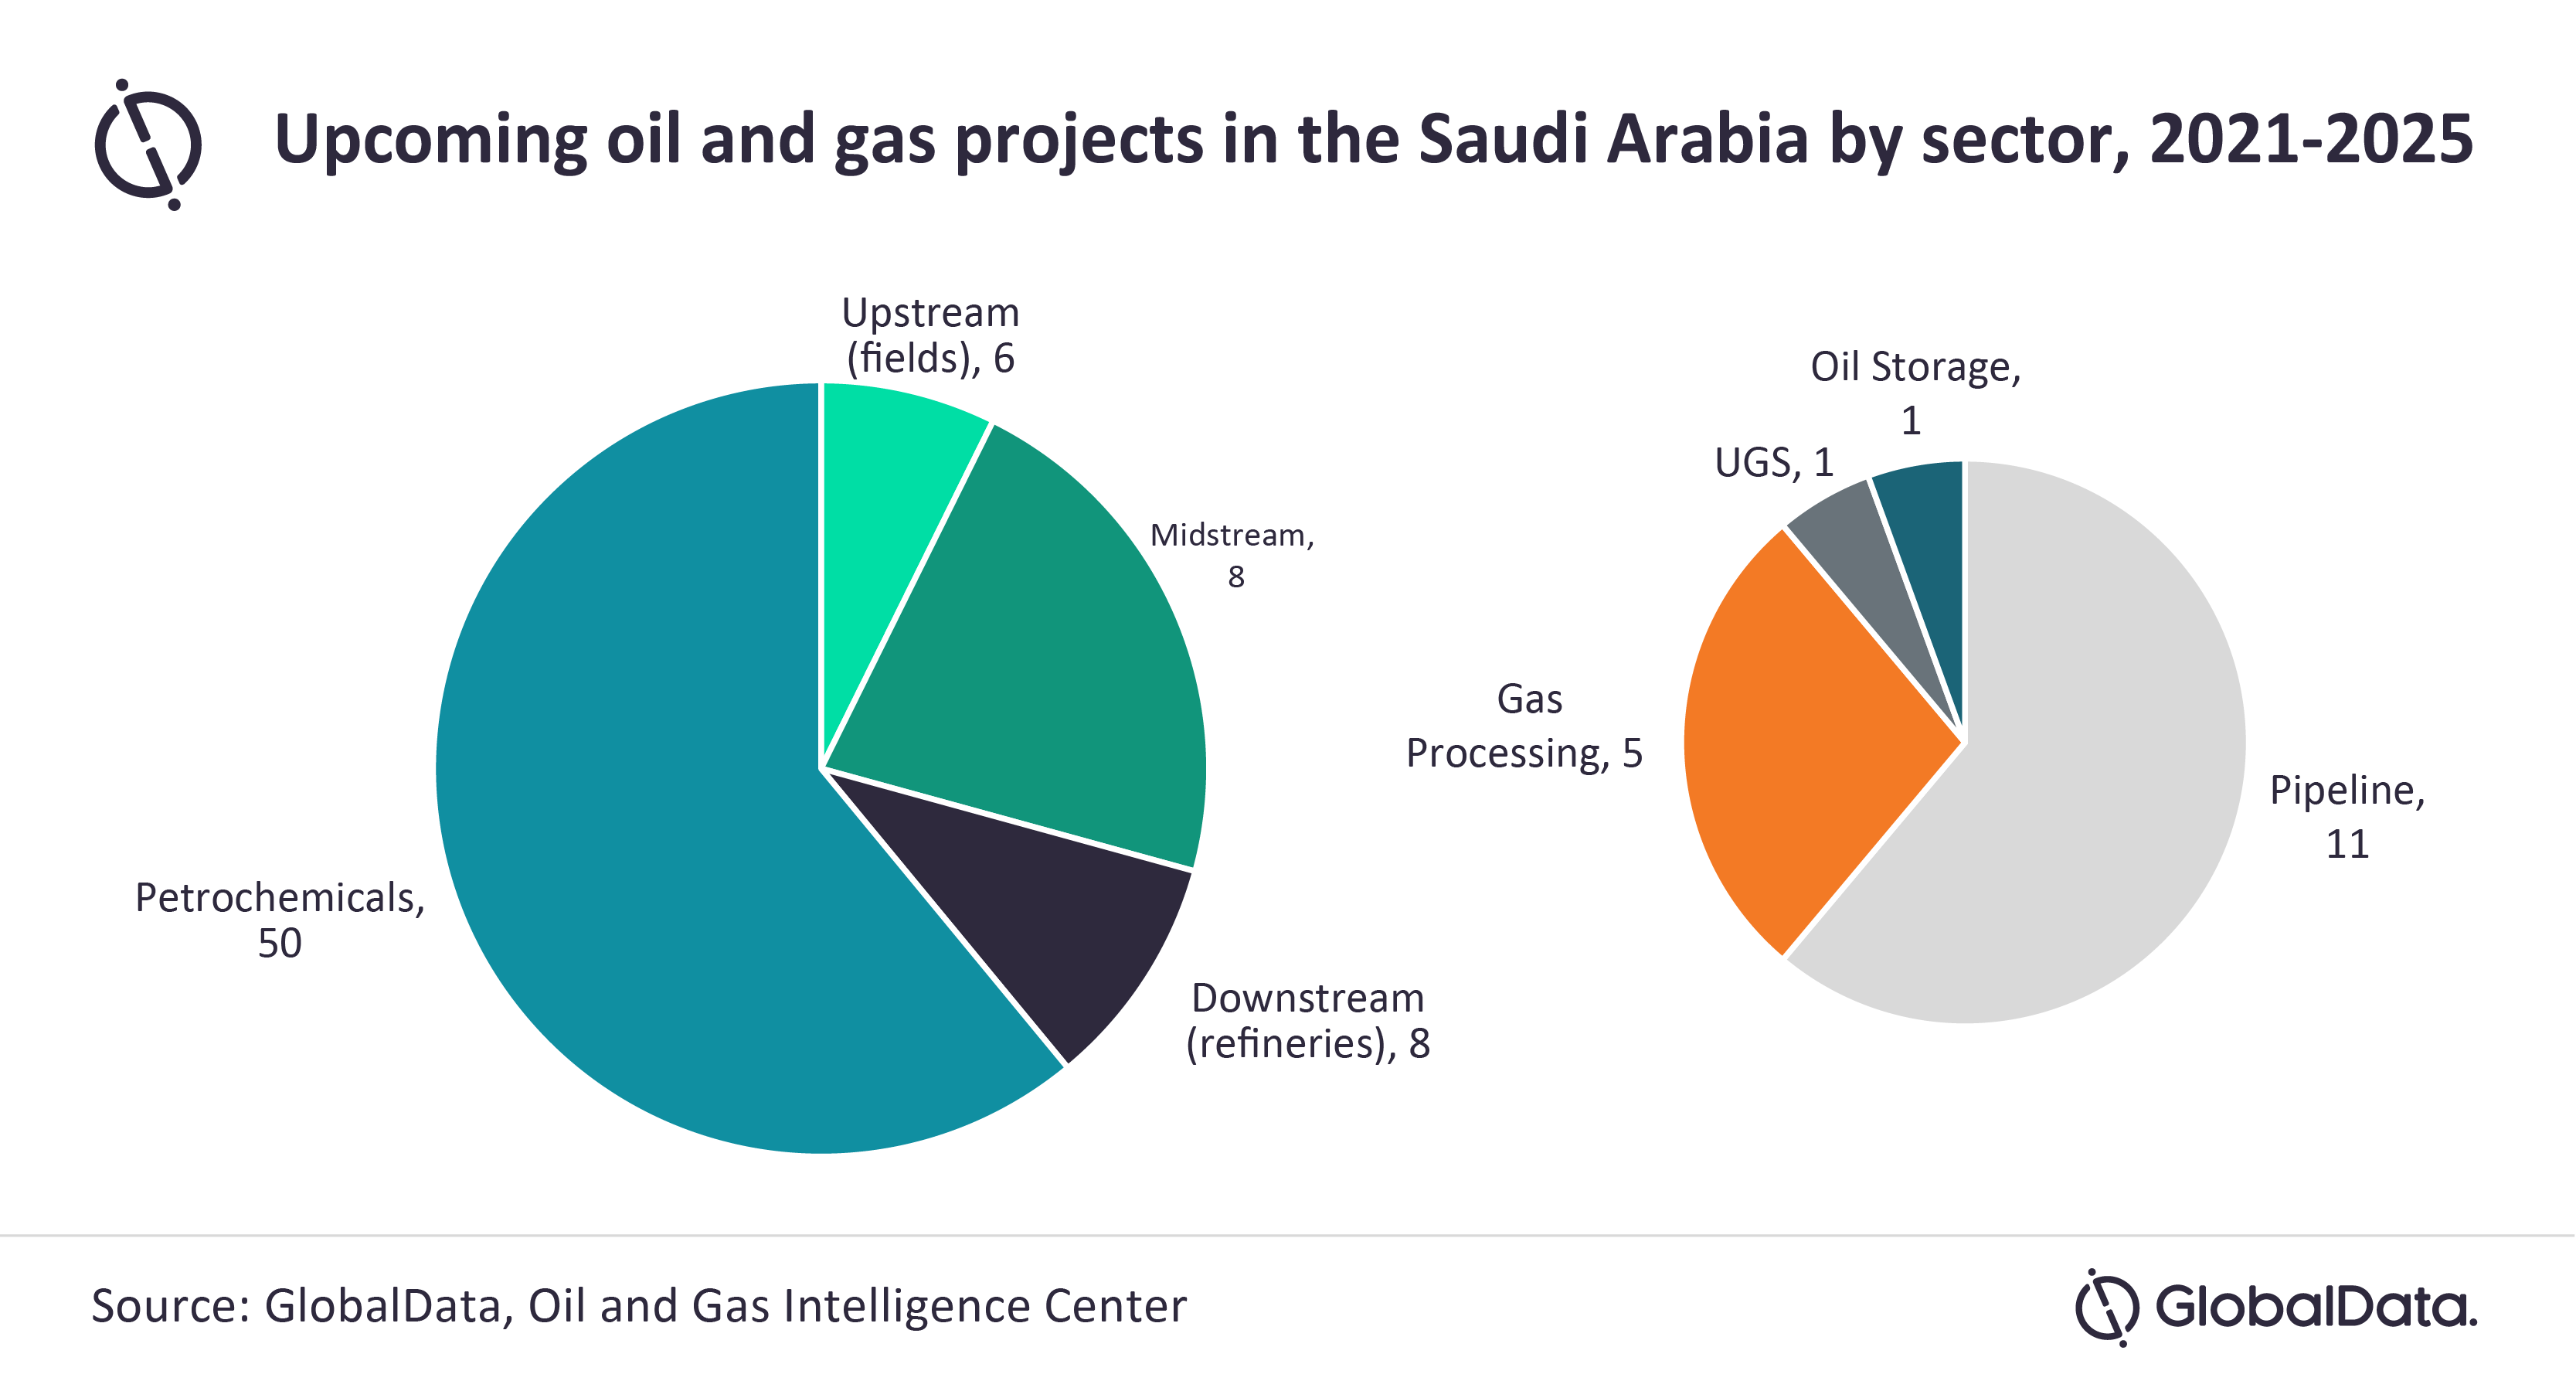 Petrochemical projects drive oil and gas projects in Saudi